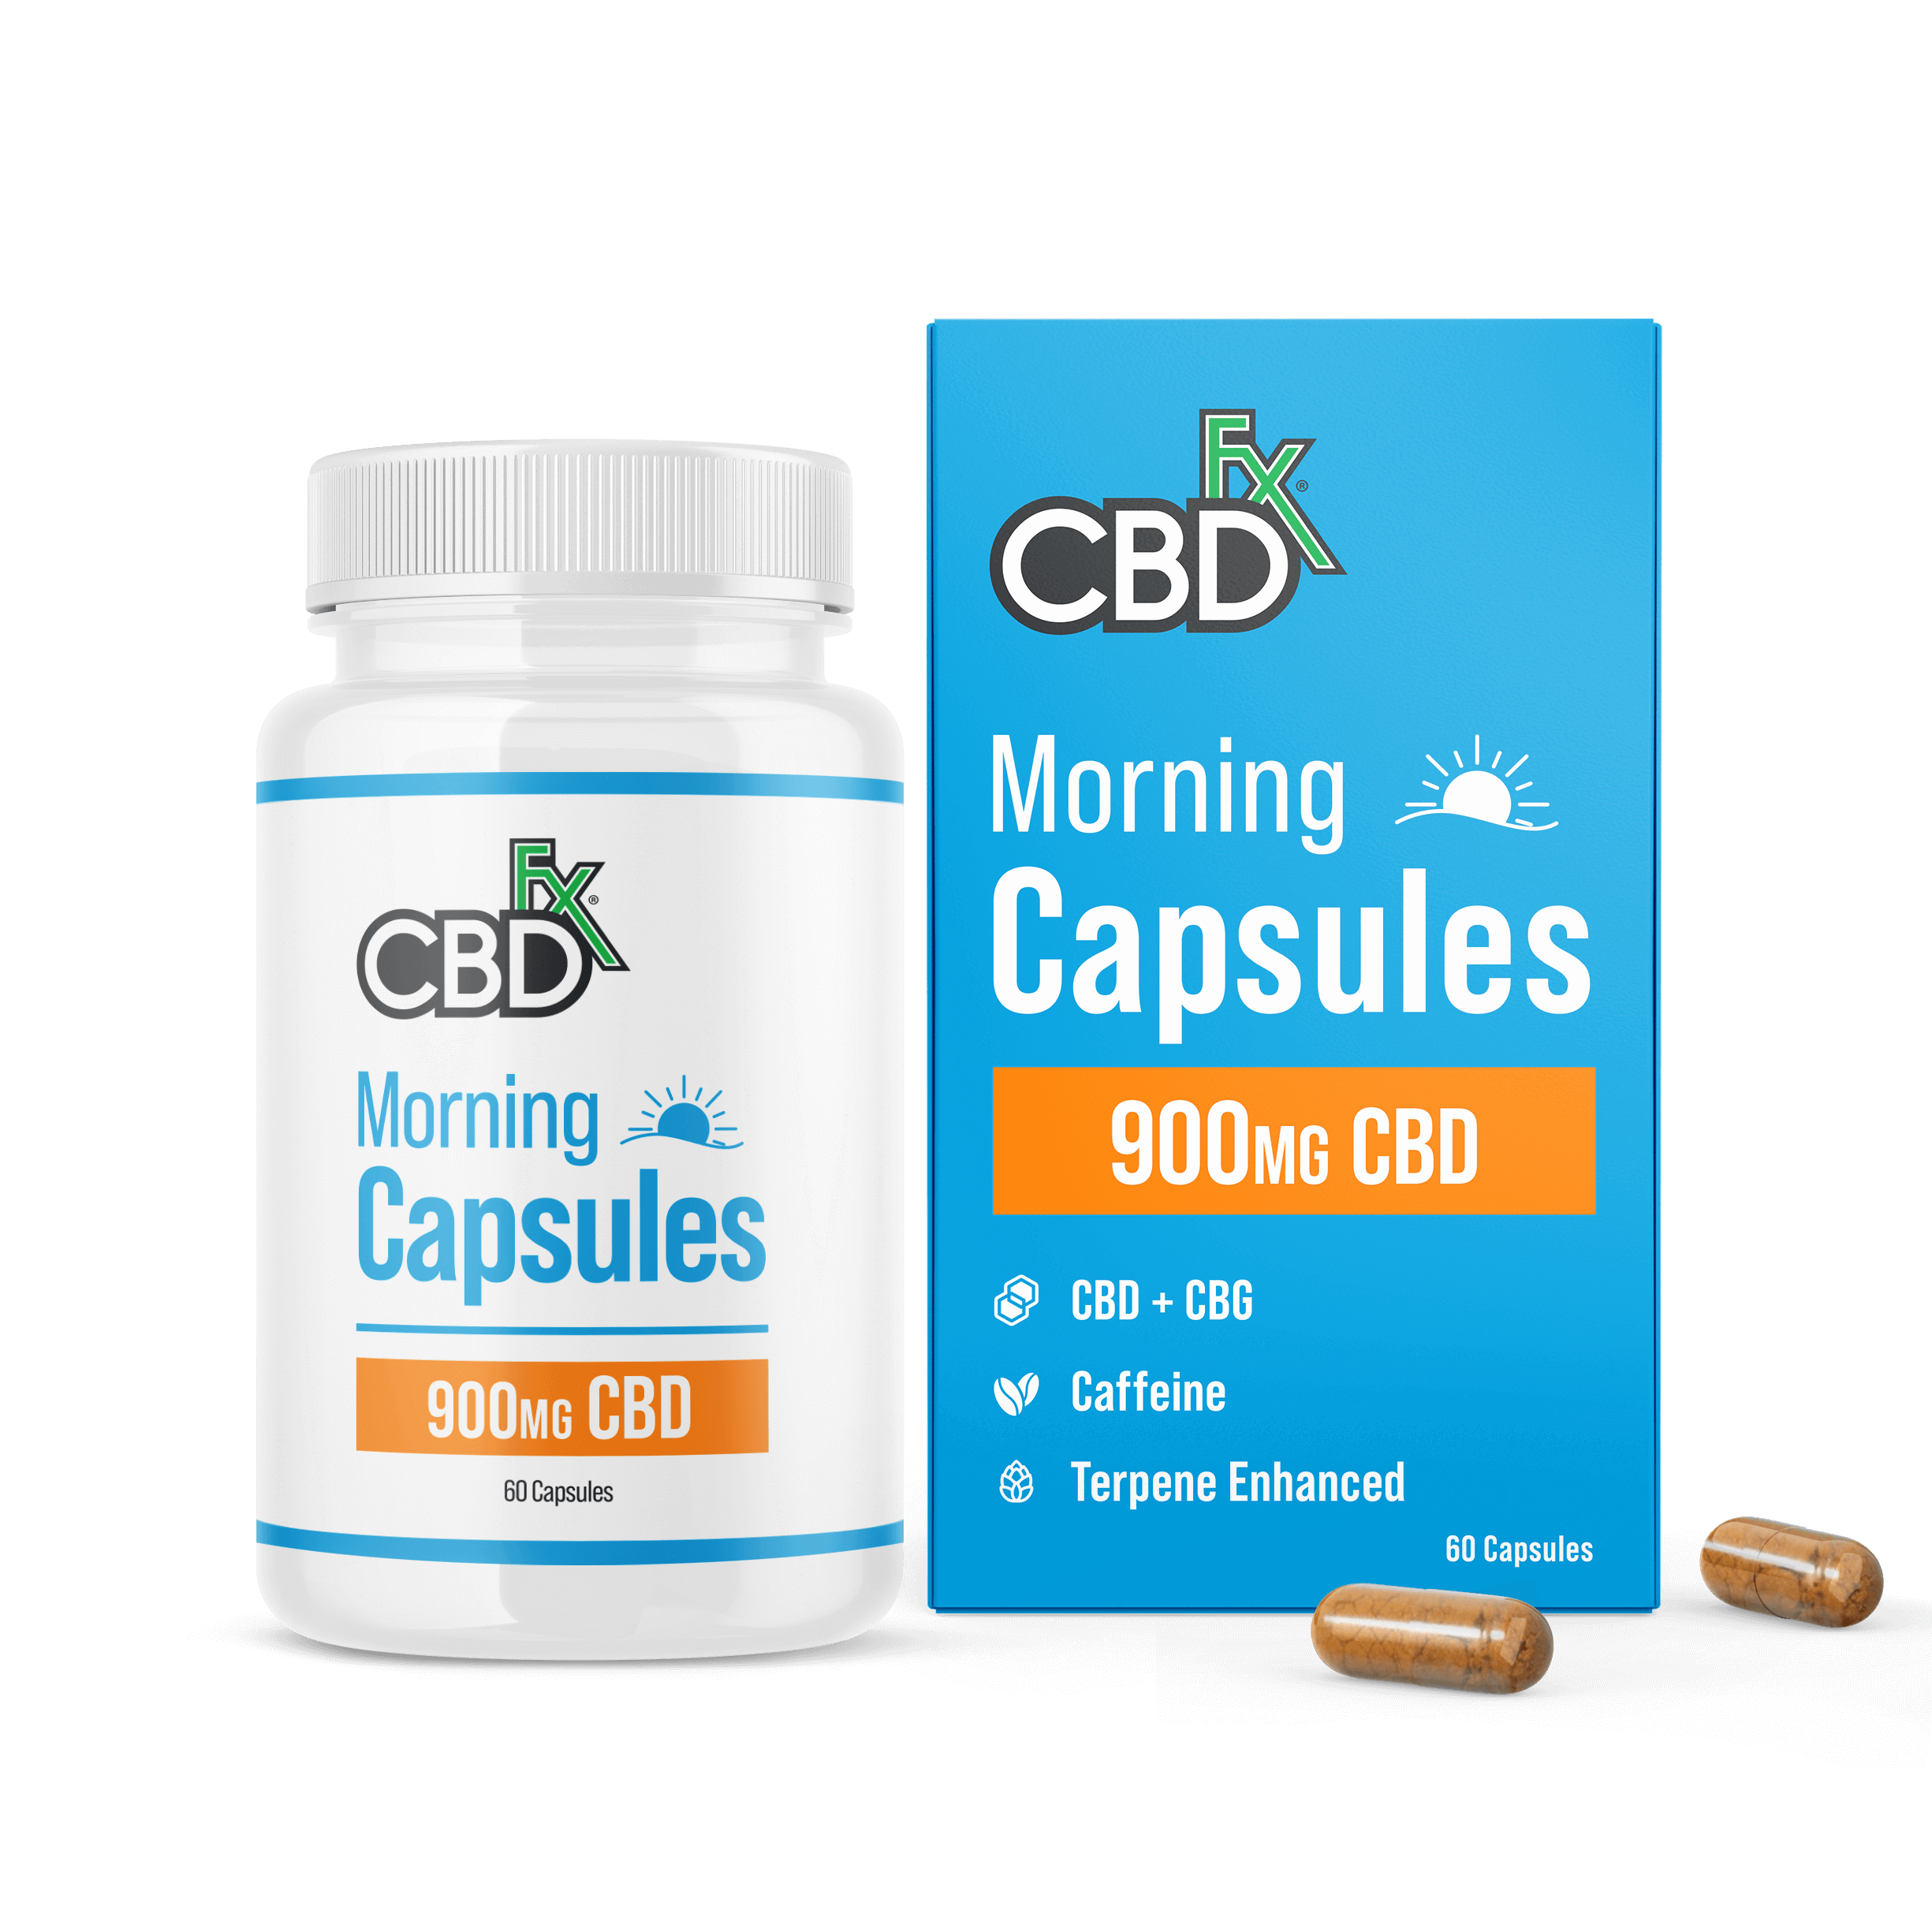 Get Your CBD + Caffeine Products Online - morning-capsules-900mg